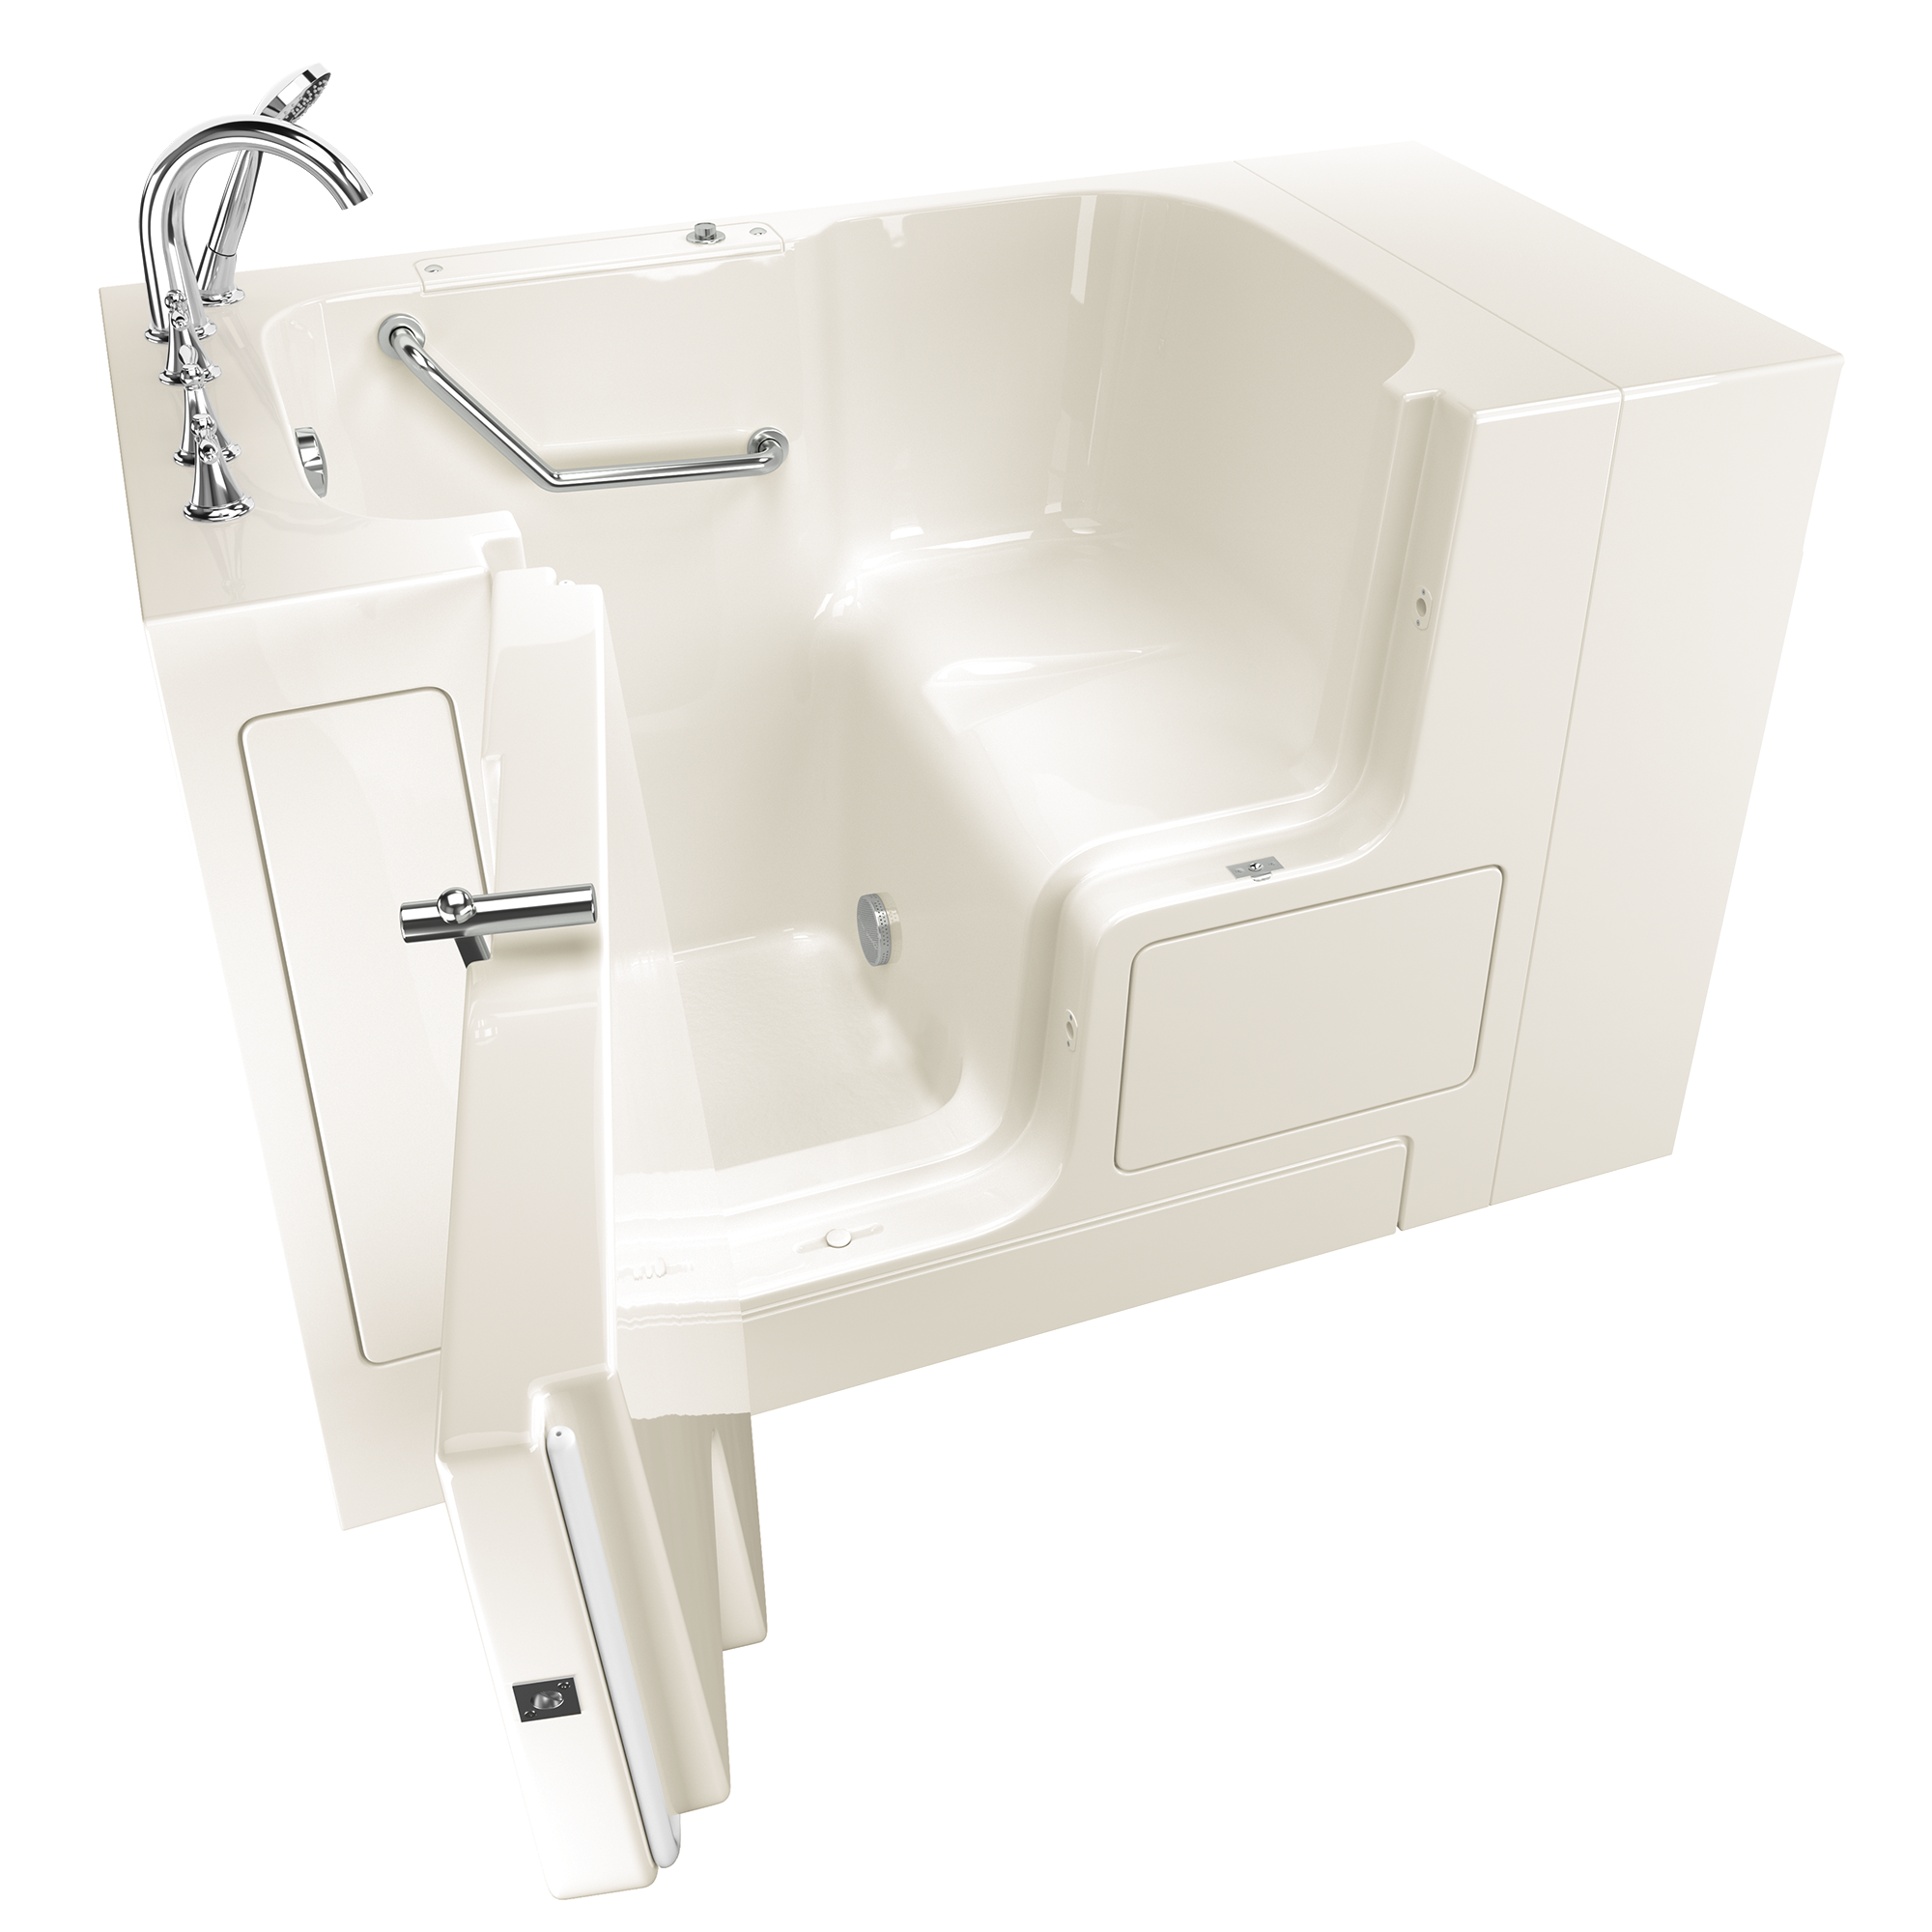 Gelcoat Value Series 32 x 52 -Inch Walk-in Tub With Soaker System - Left-Hand Drain With Faucet